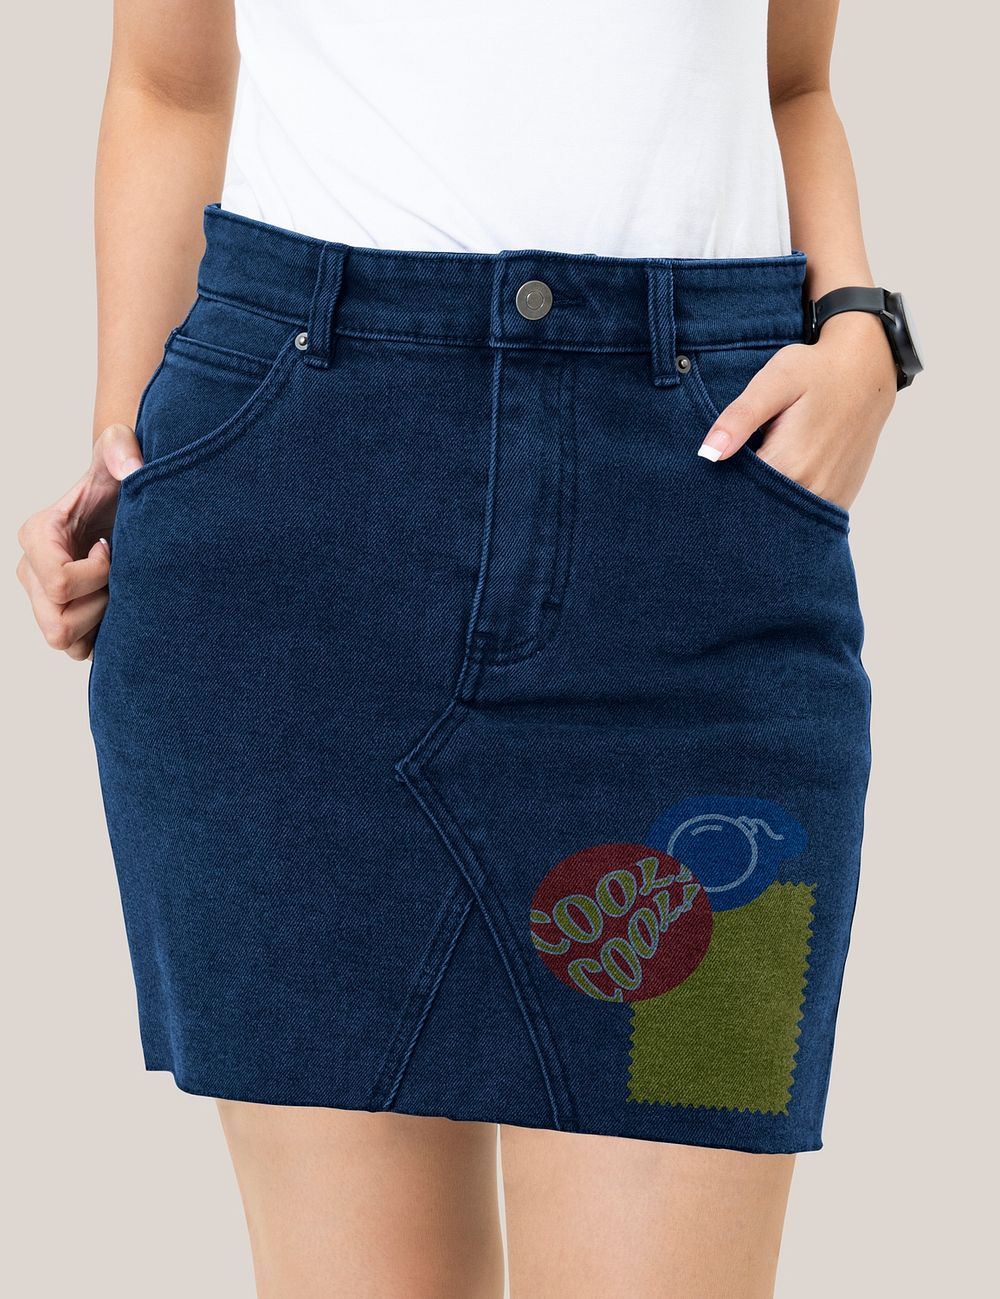 Women&rsquo;s denim skirt psd mockup with graphic designs fashion shoot front view